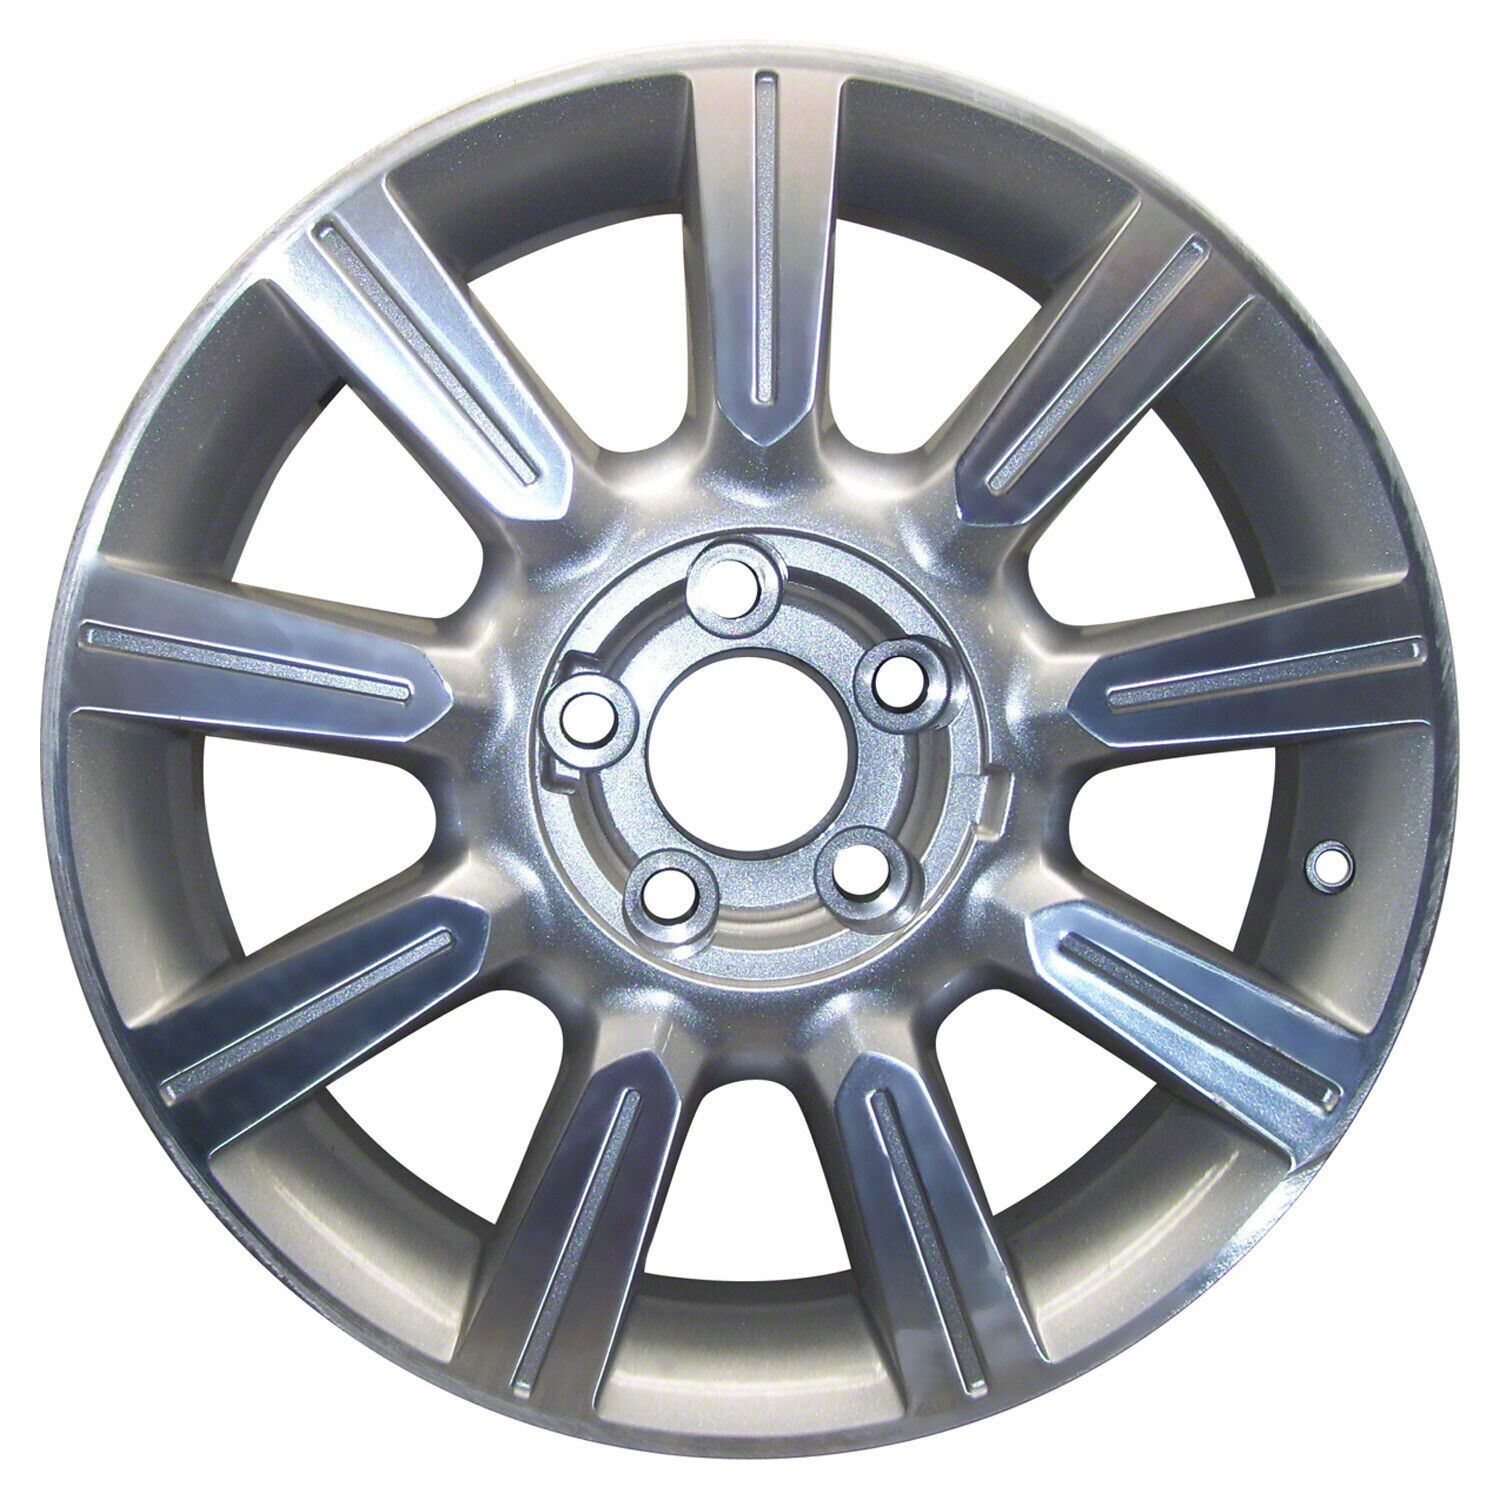 03805 Reconditioned OEM Aluminum Wheel 17x7.5 fits 2010-2012 Lincoln MKZ